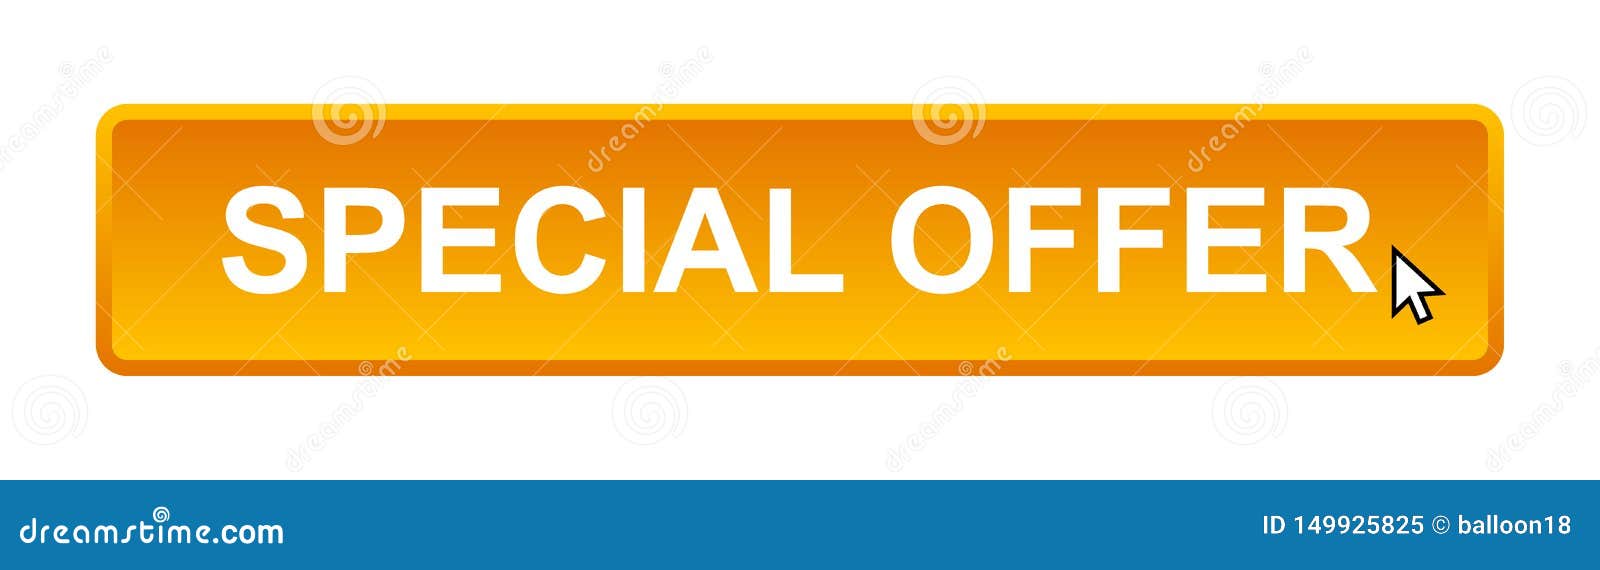 Special offer button. Vector illustration of glossy special offer web button on isolated white background